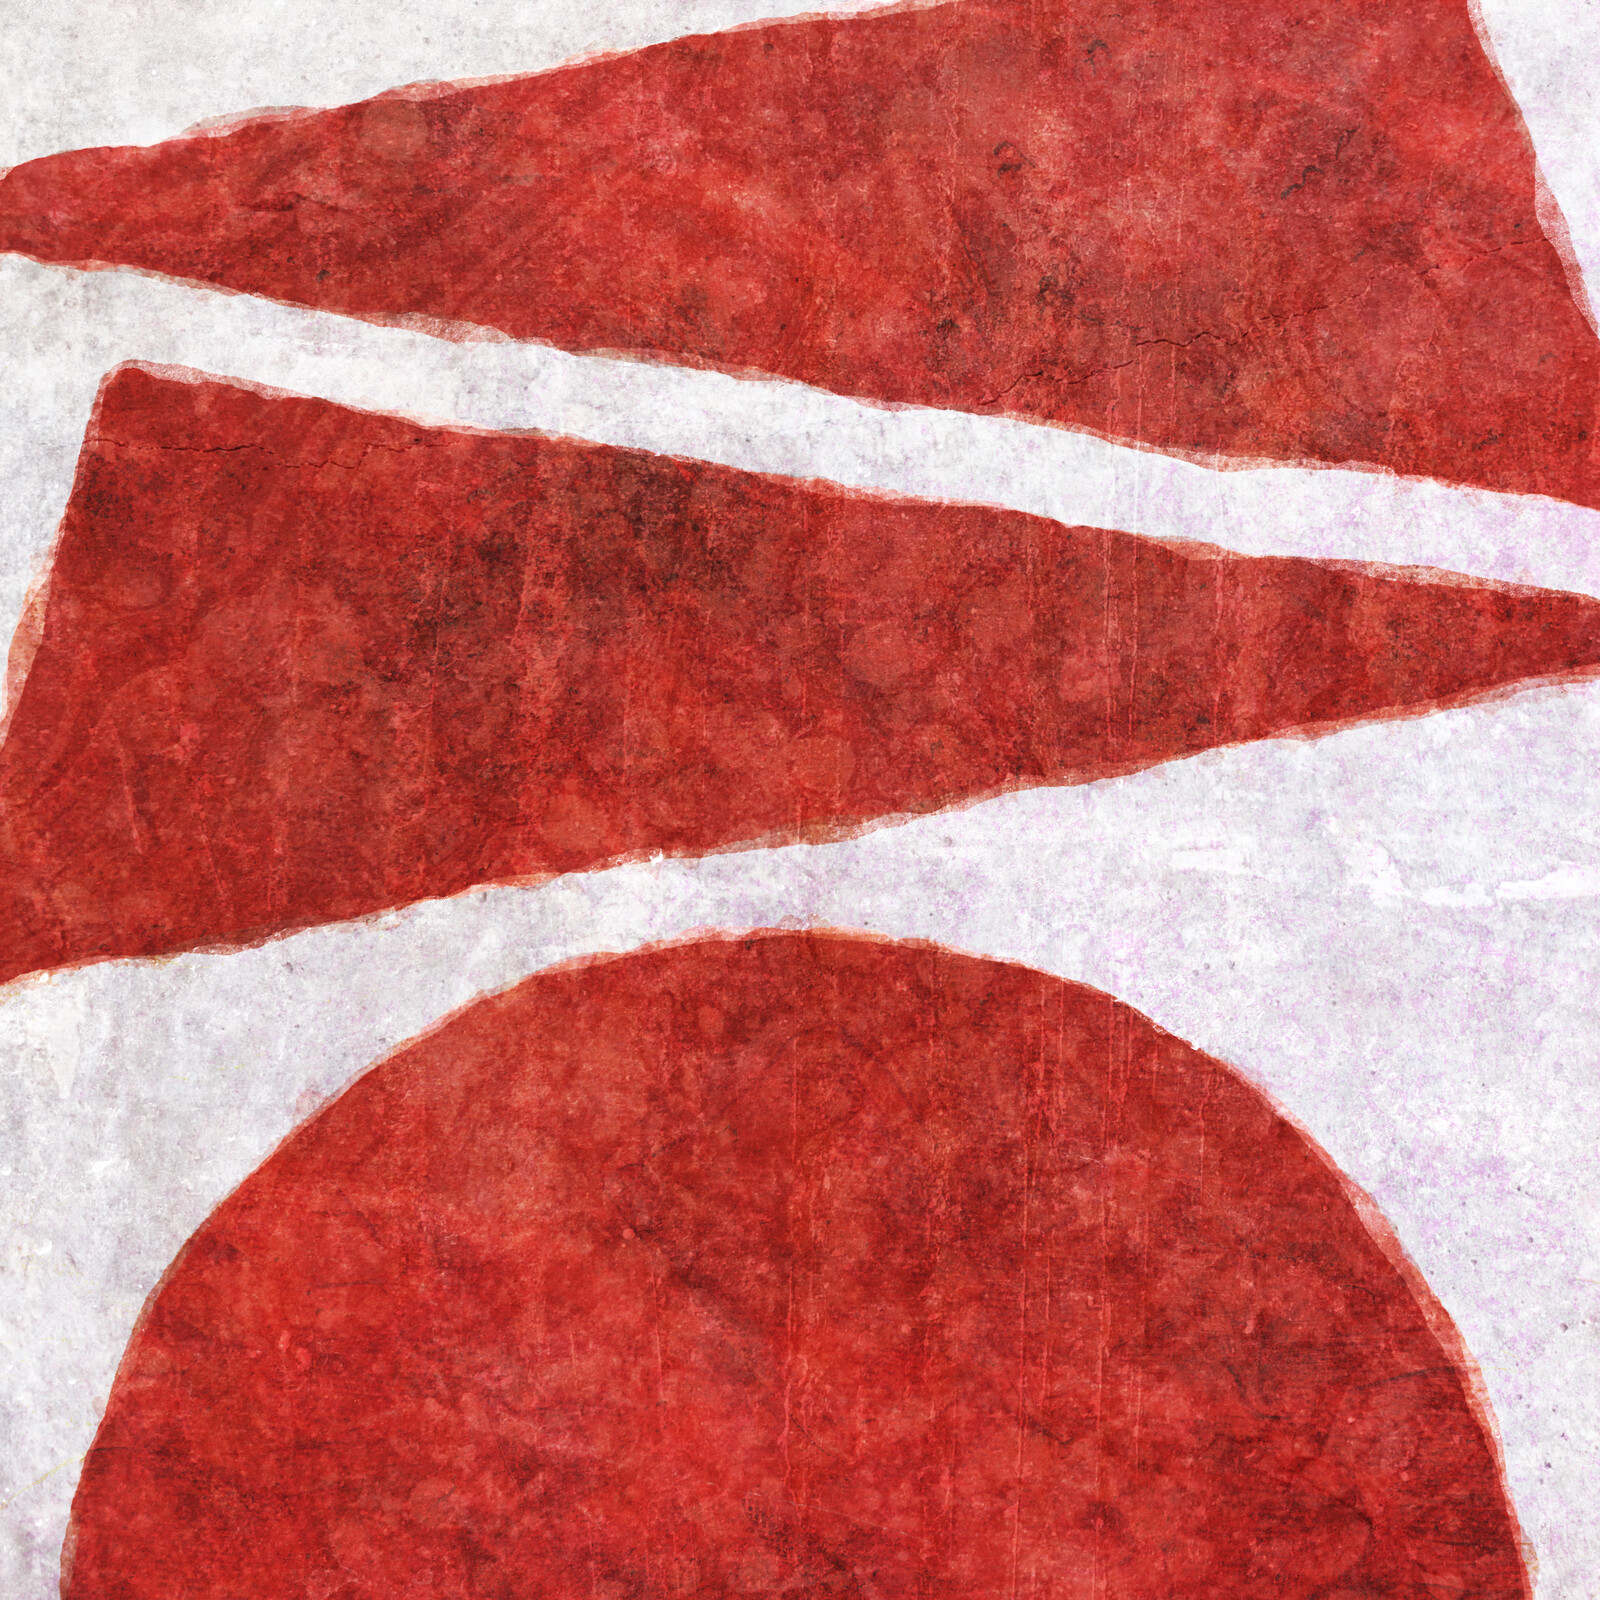 A large red circle with two red triangles above it, on a light background.